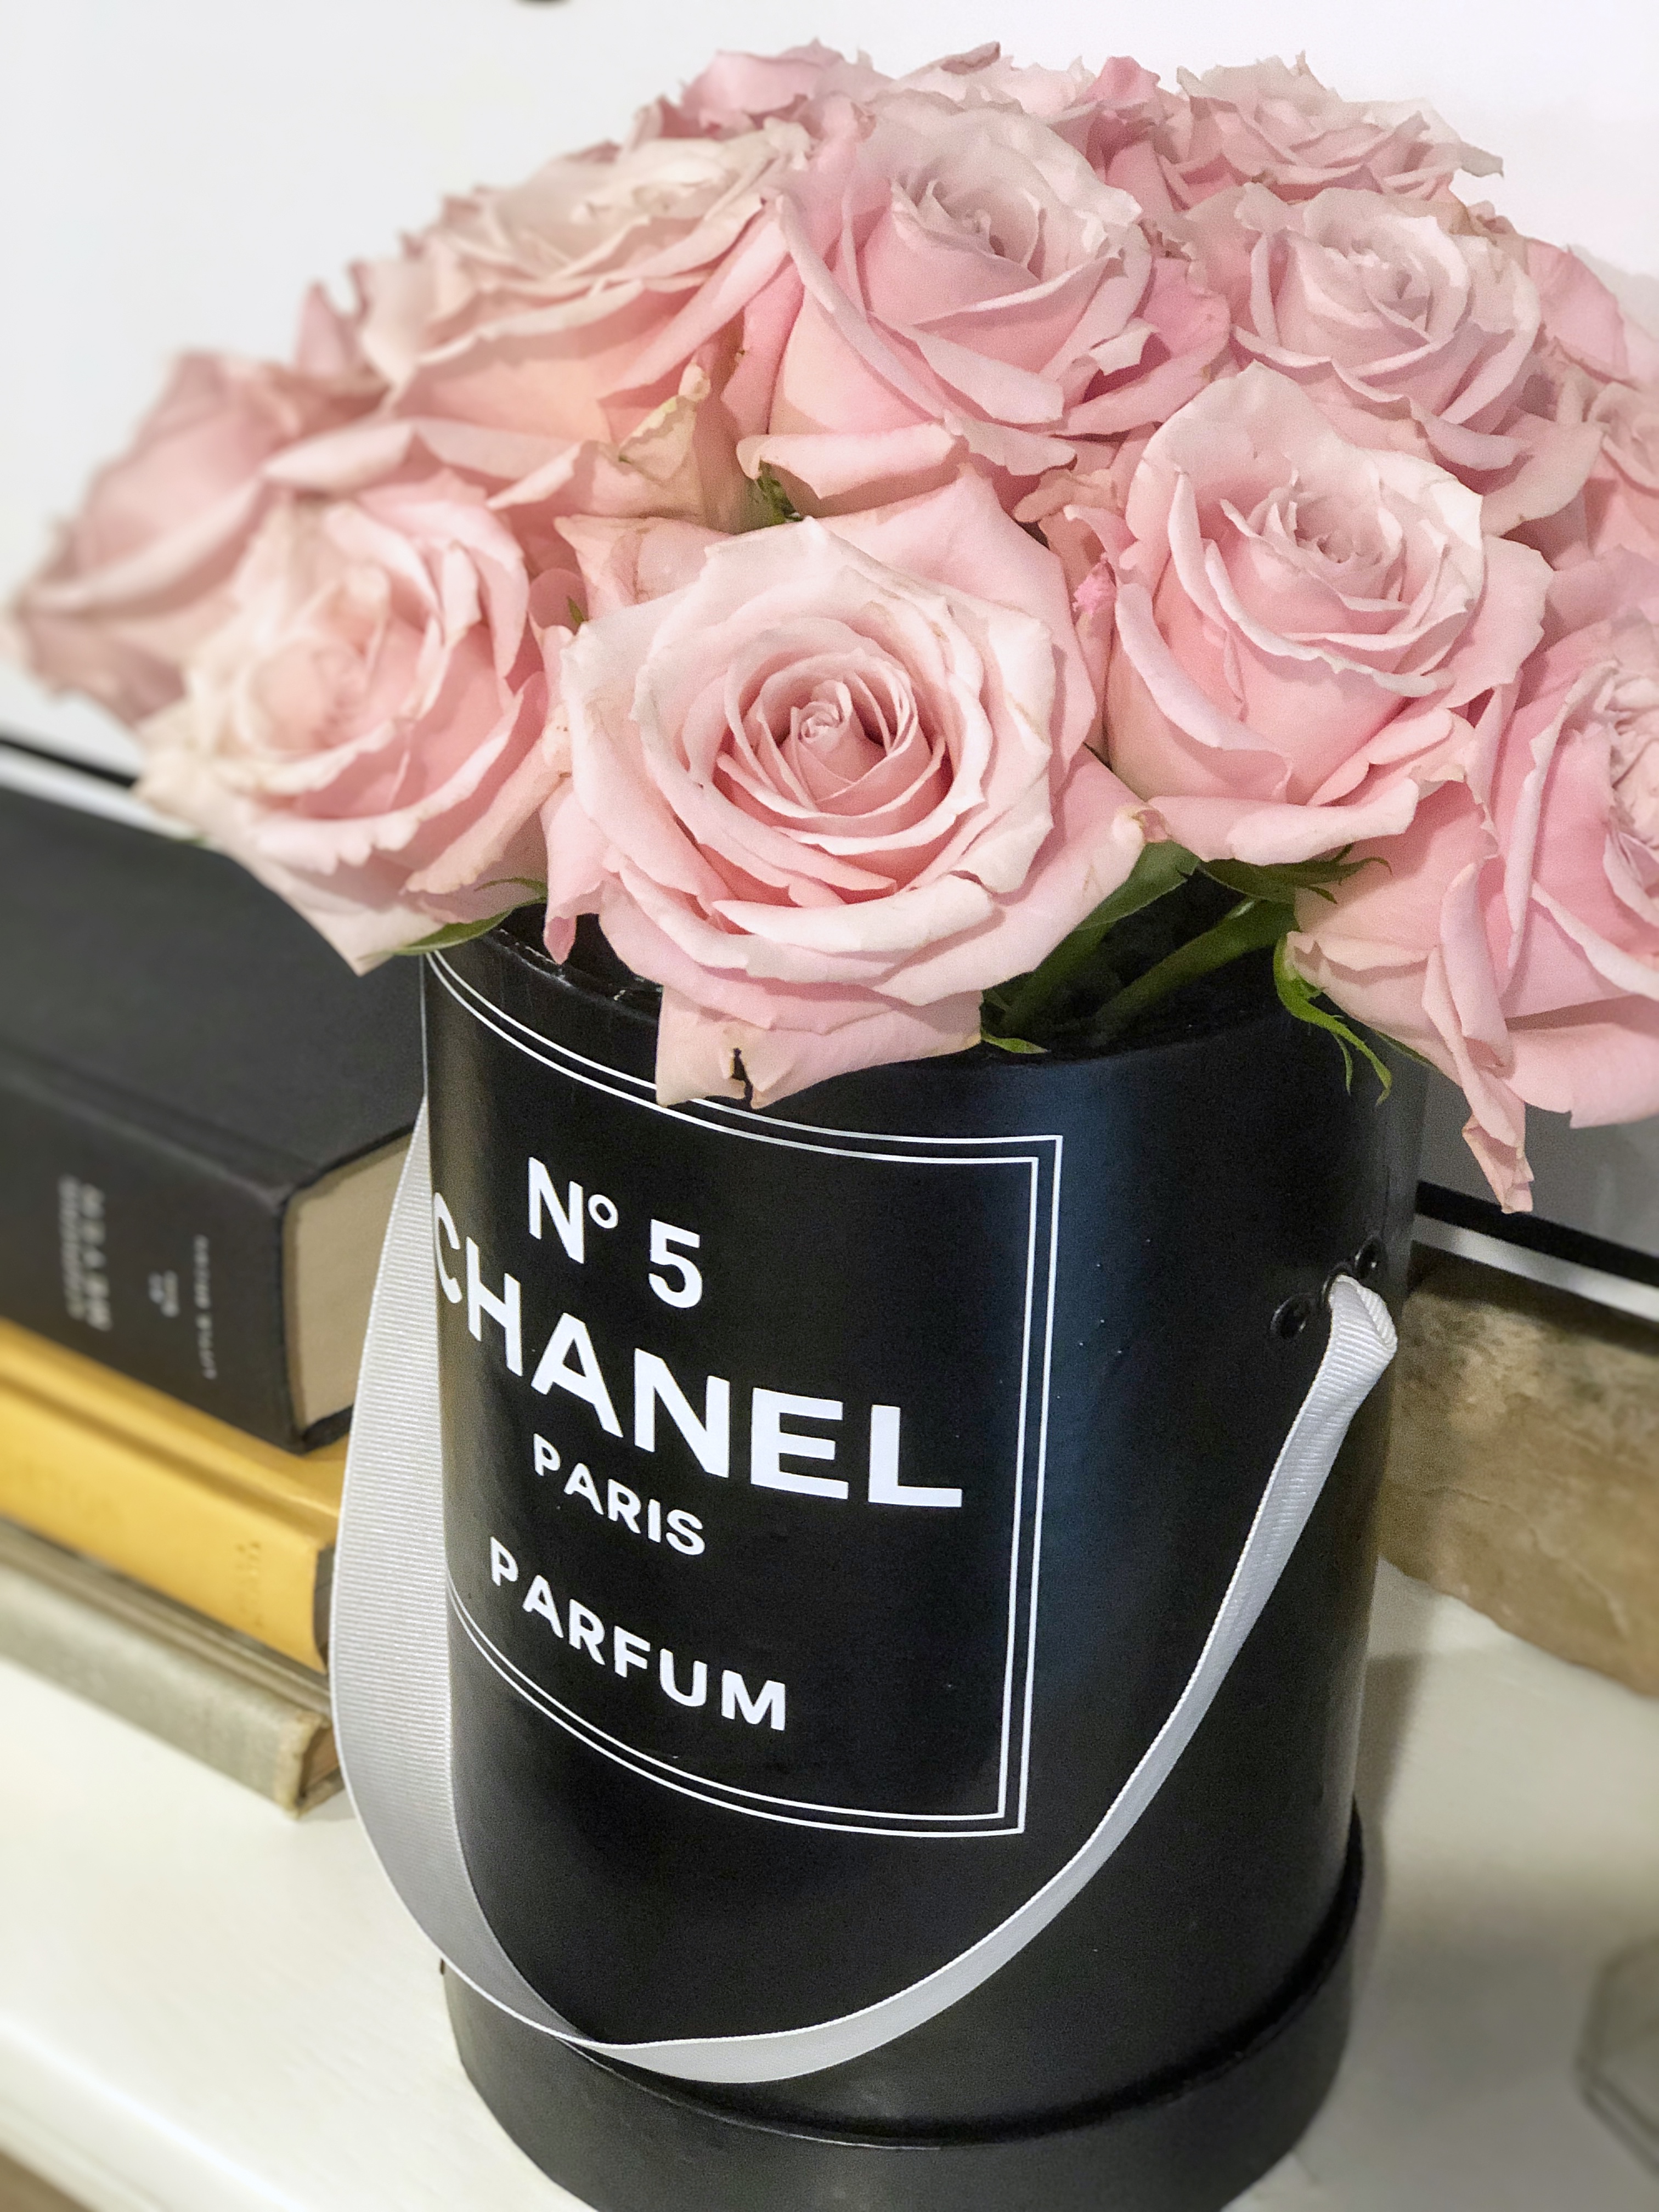 chanel decorations for party